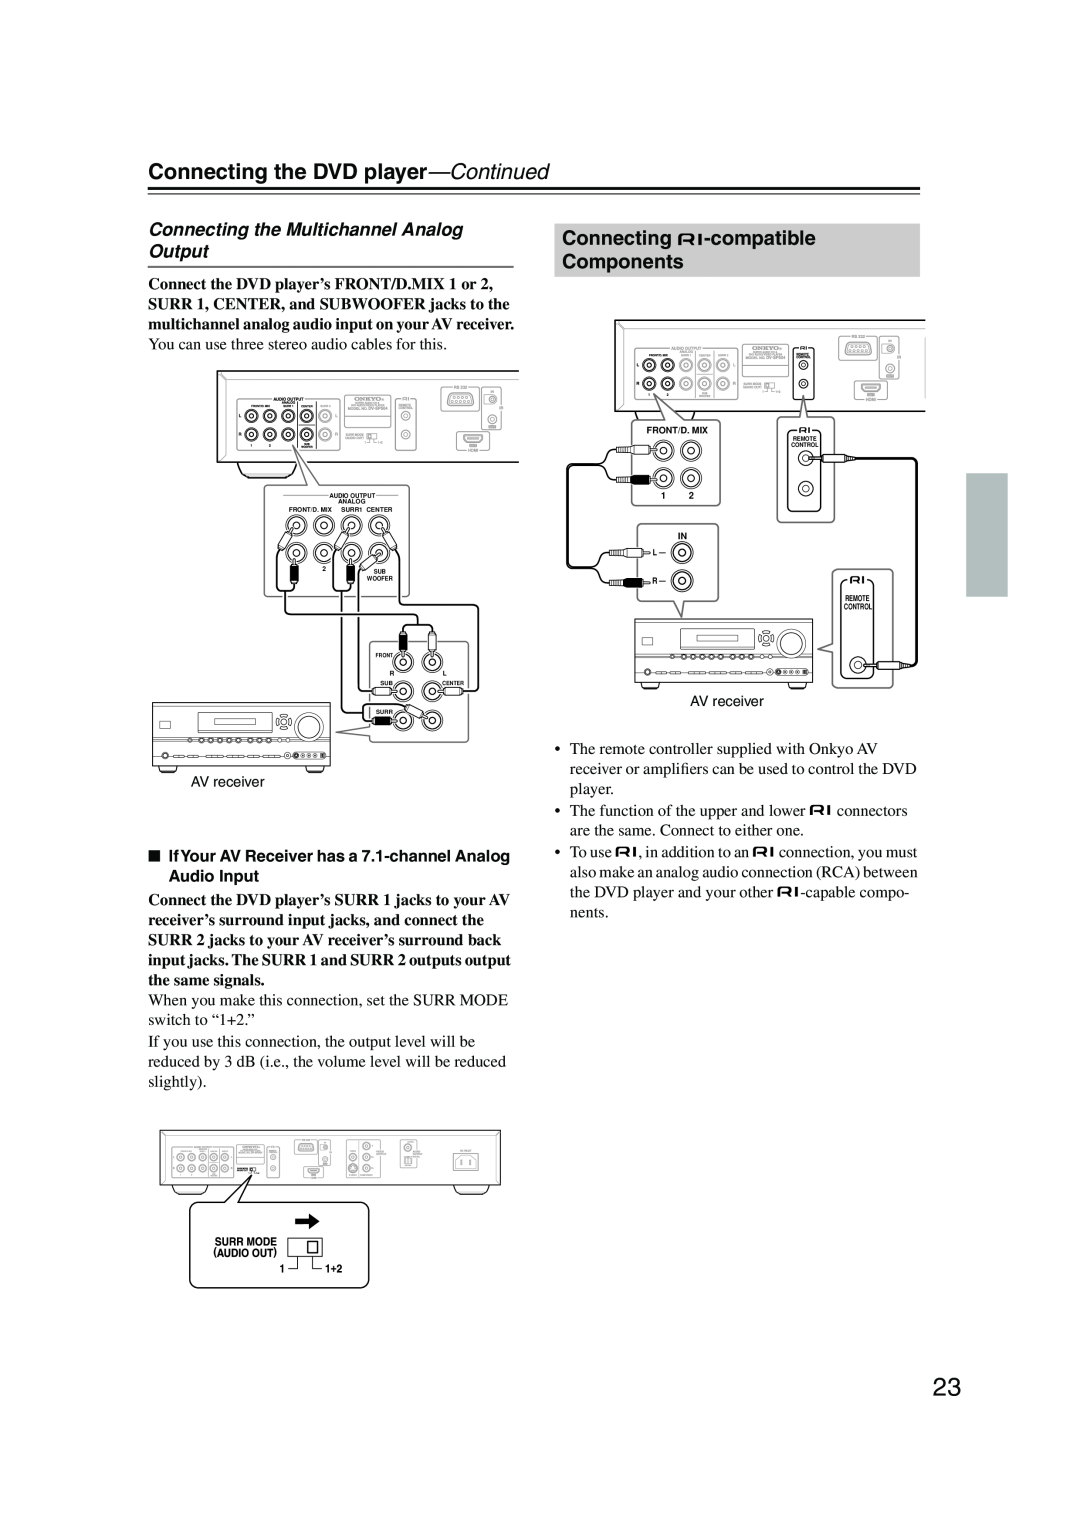 Onkyo DV-SP504E instruction manual Connecting -compatible Components, Connecting the DVD player-Continued 